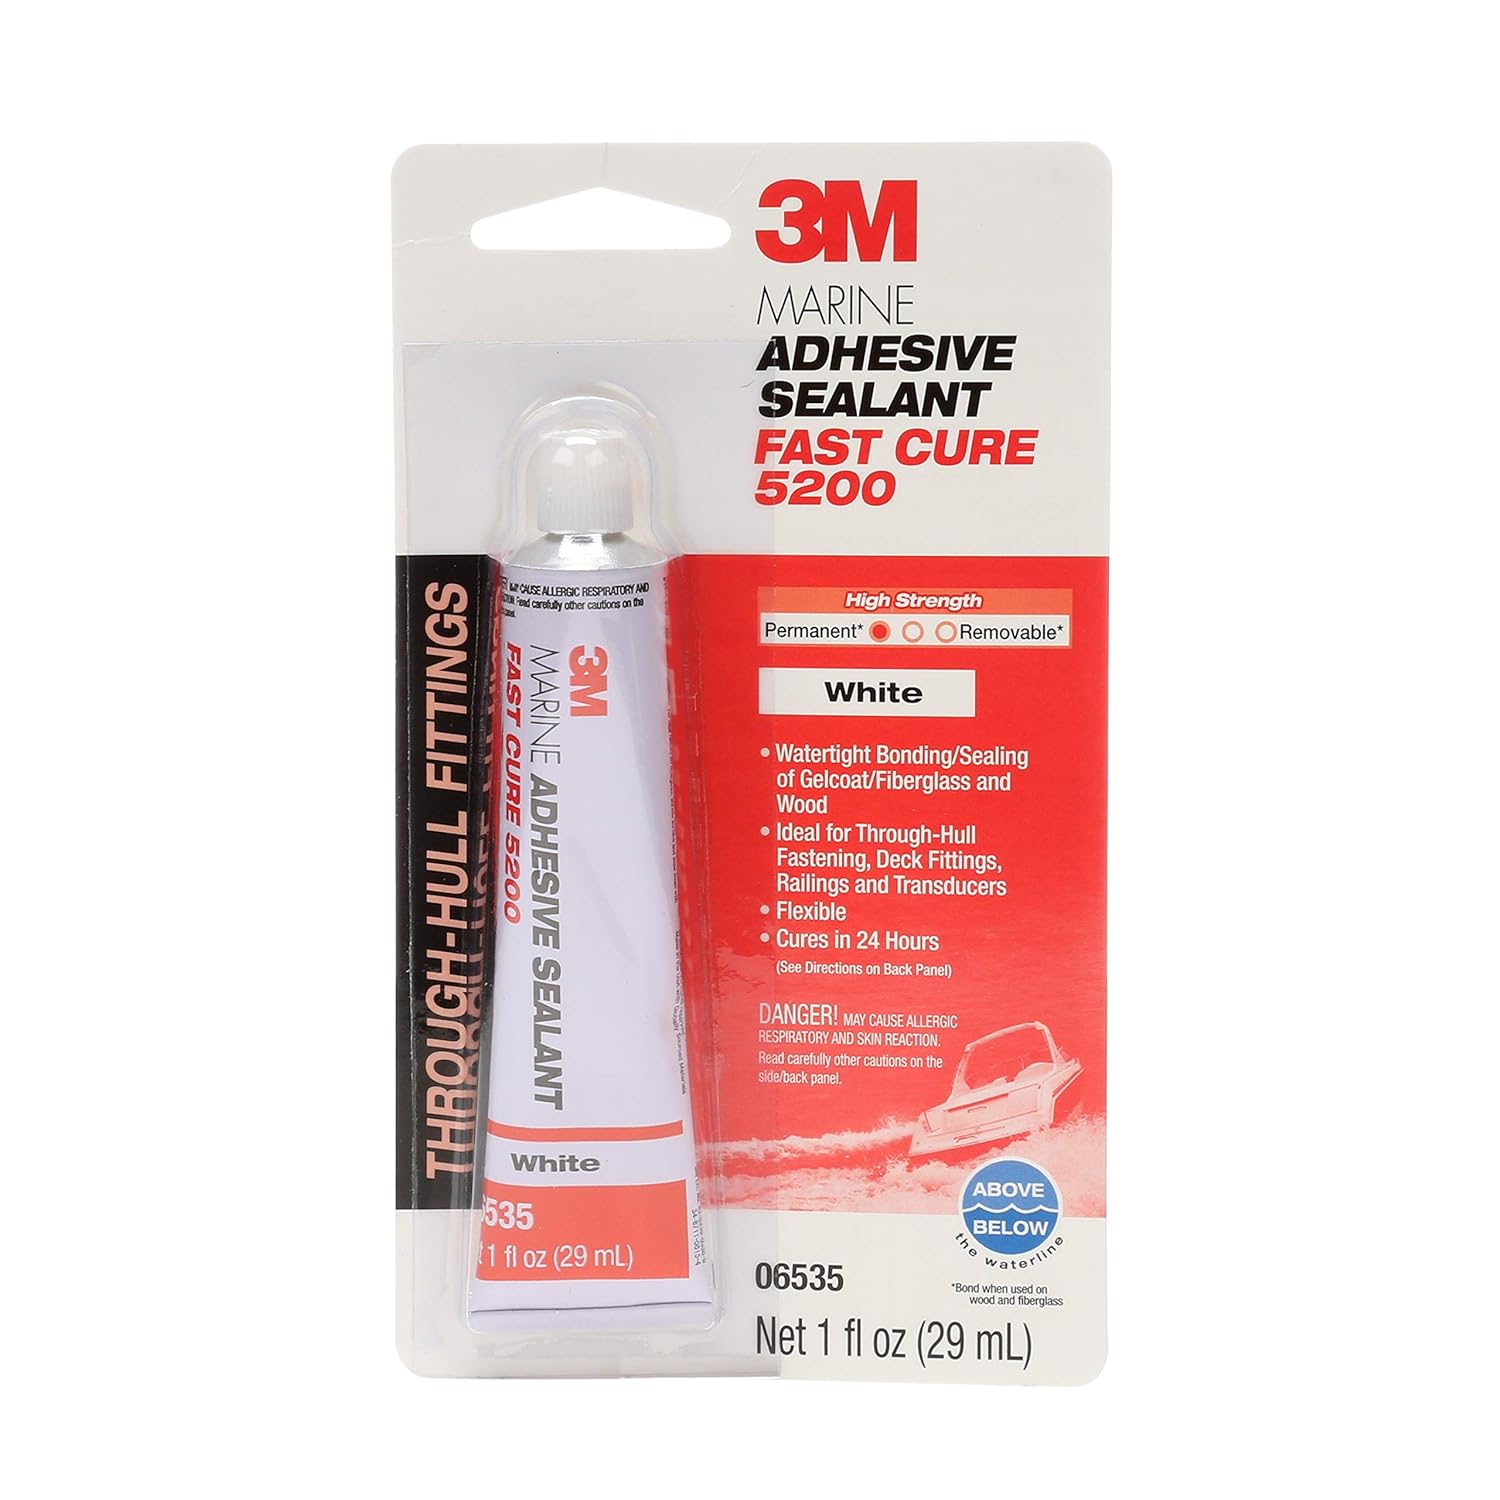 3M Marine Adhesive Sealant Fast Cure 5200 (06535) Permanent Bonding and Sealing for Boats and RVs Above and Below the Waterline Waterproof Repair, White, 1 fl oz Tube